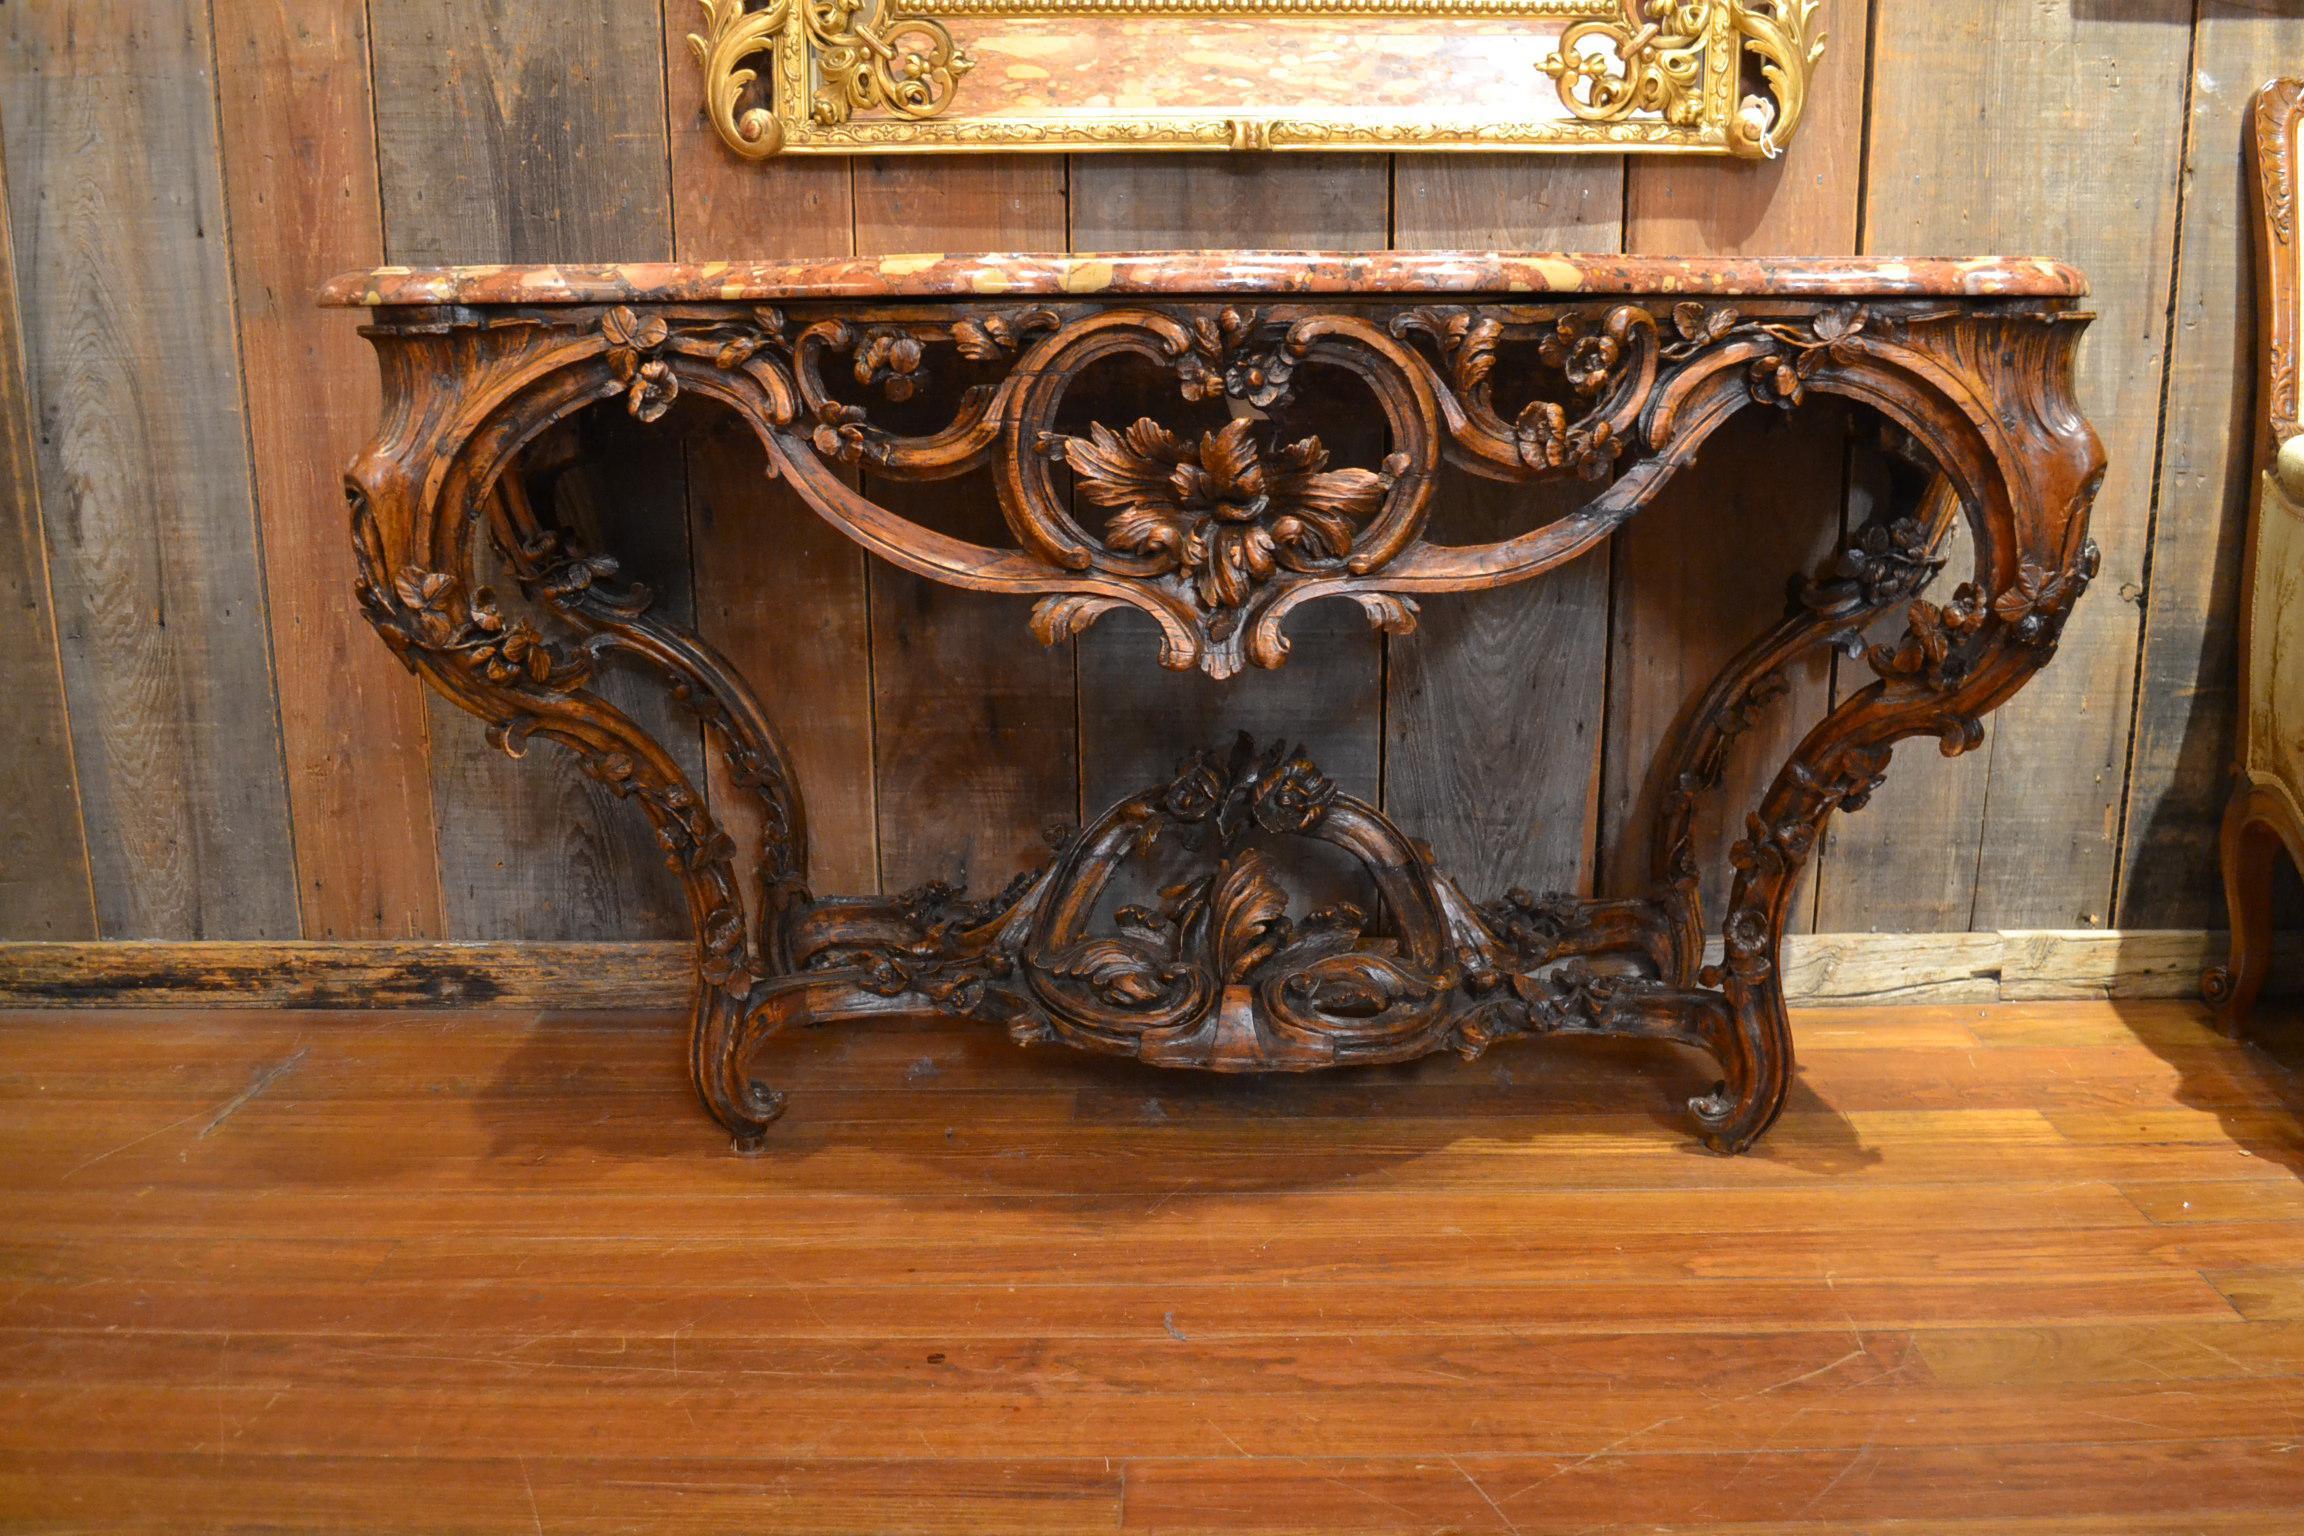 A beautiful console from the late 18th century.